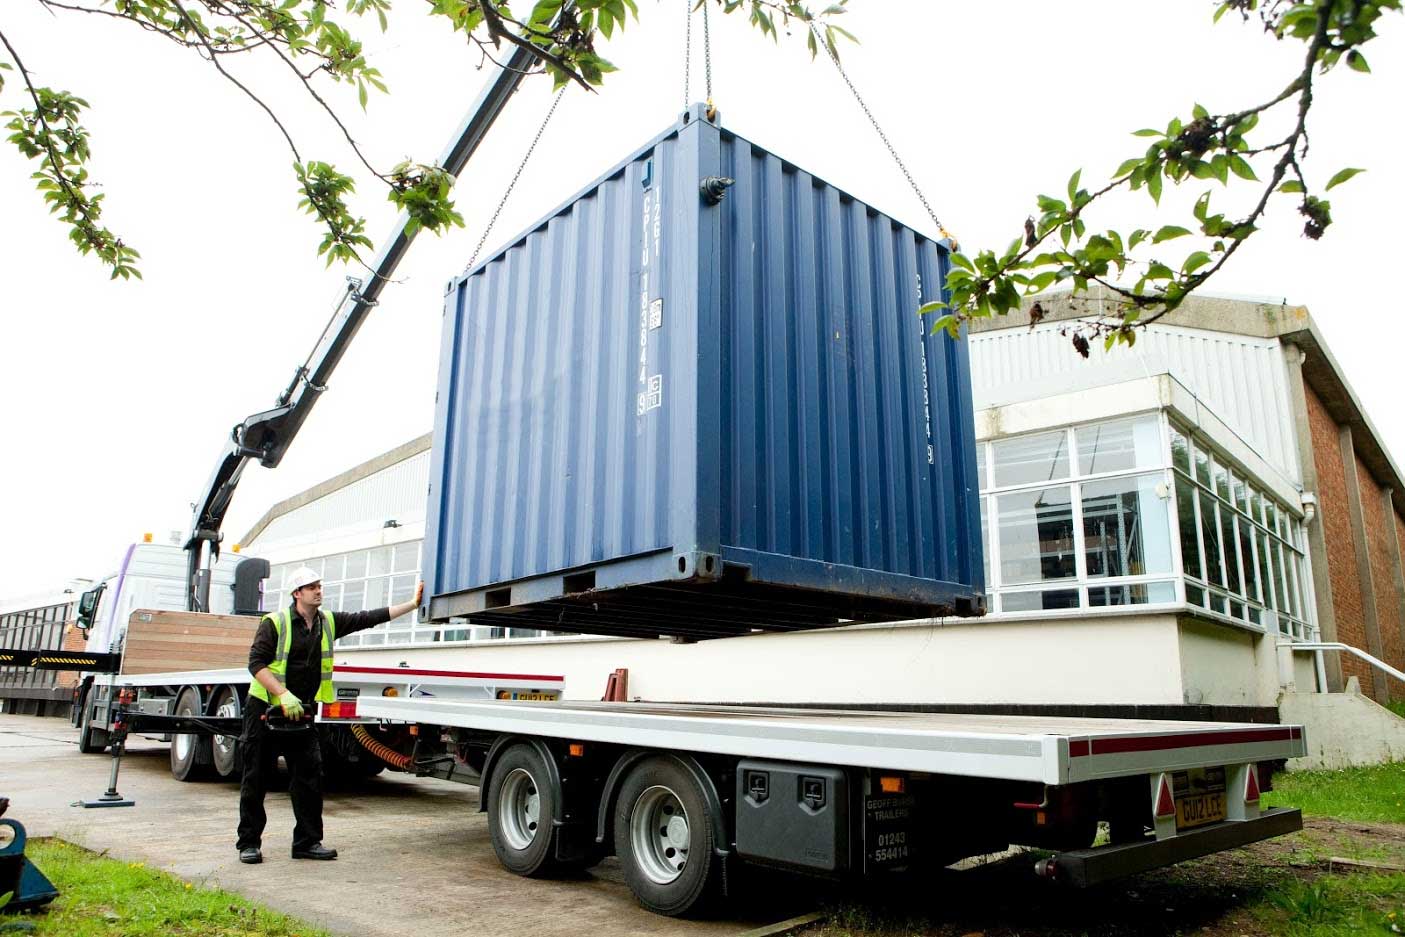 Blue square container being loaded onto flat bed truck.